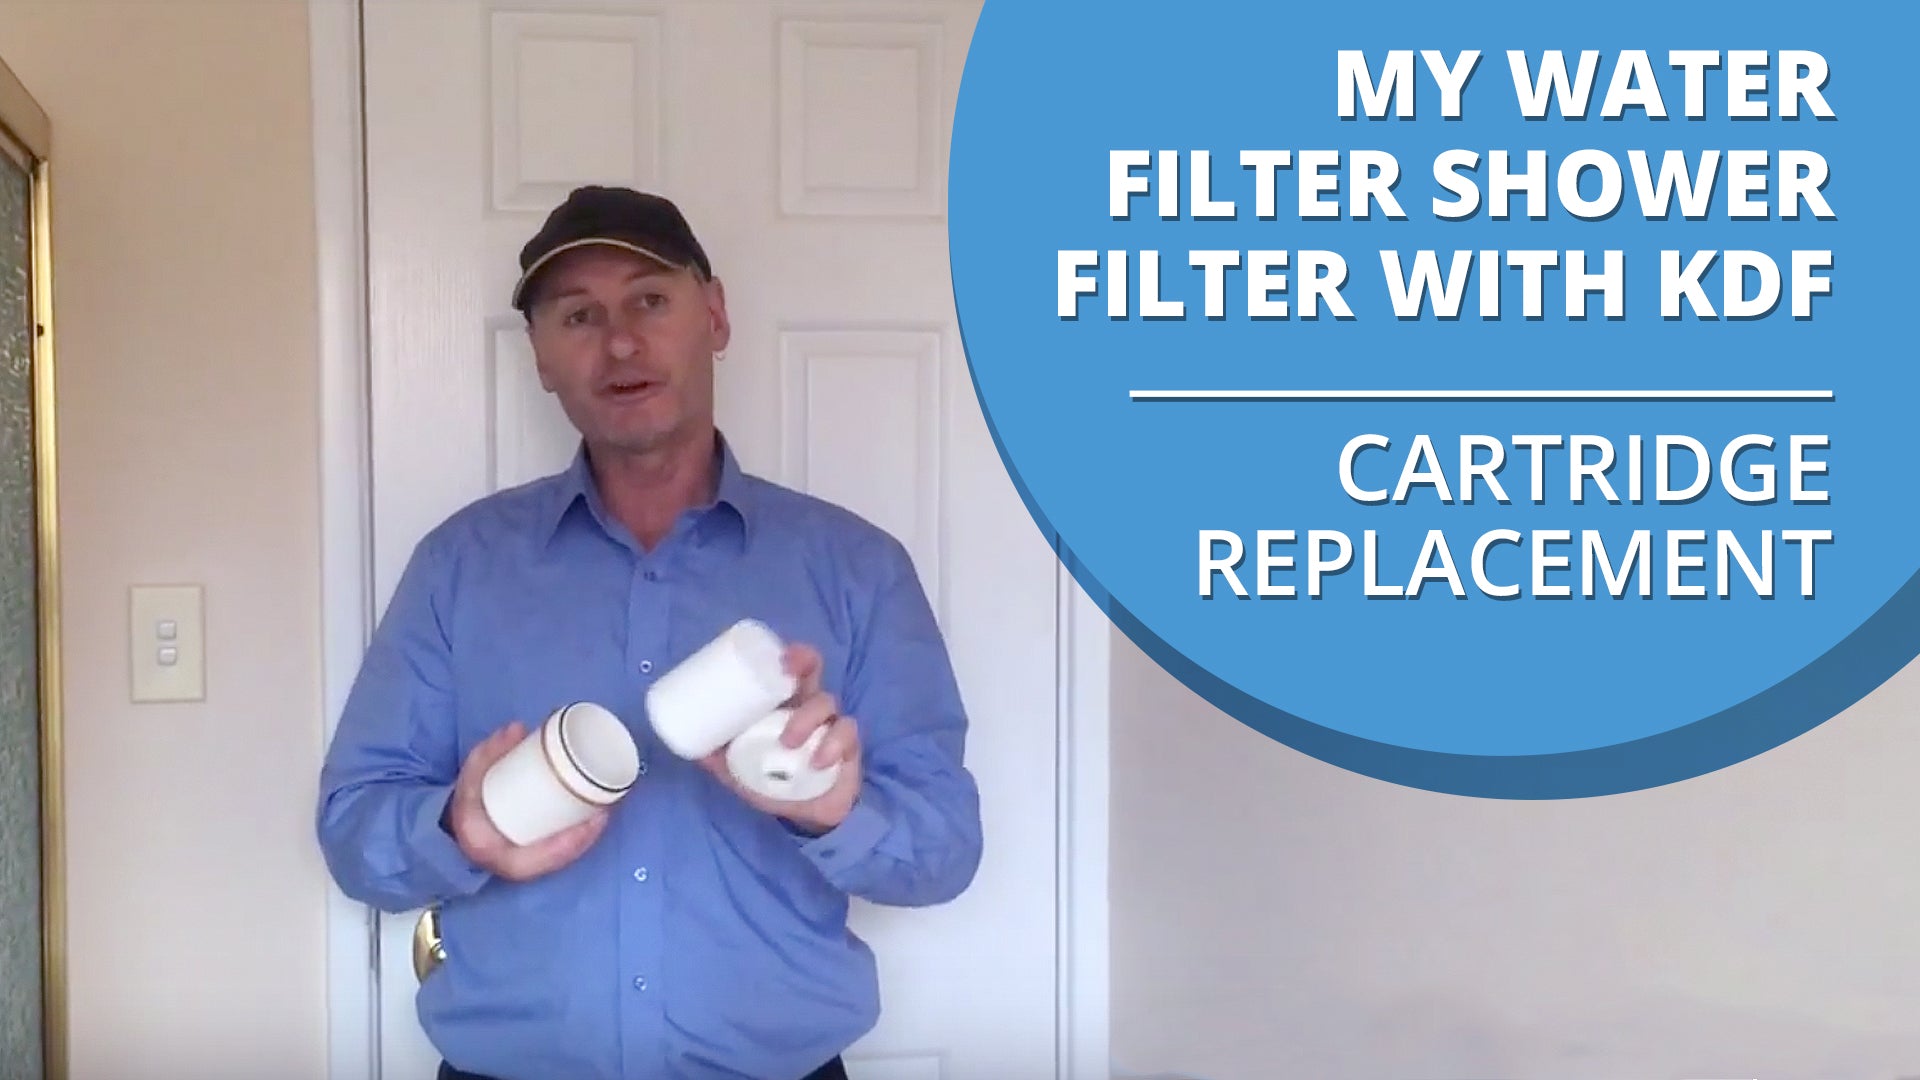 My Water Filter Shower Filter with KDF Cartridge Replacement